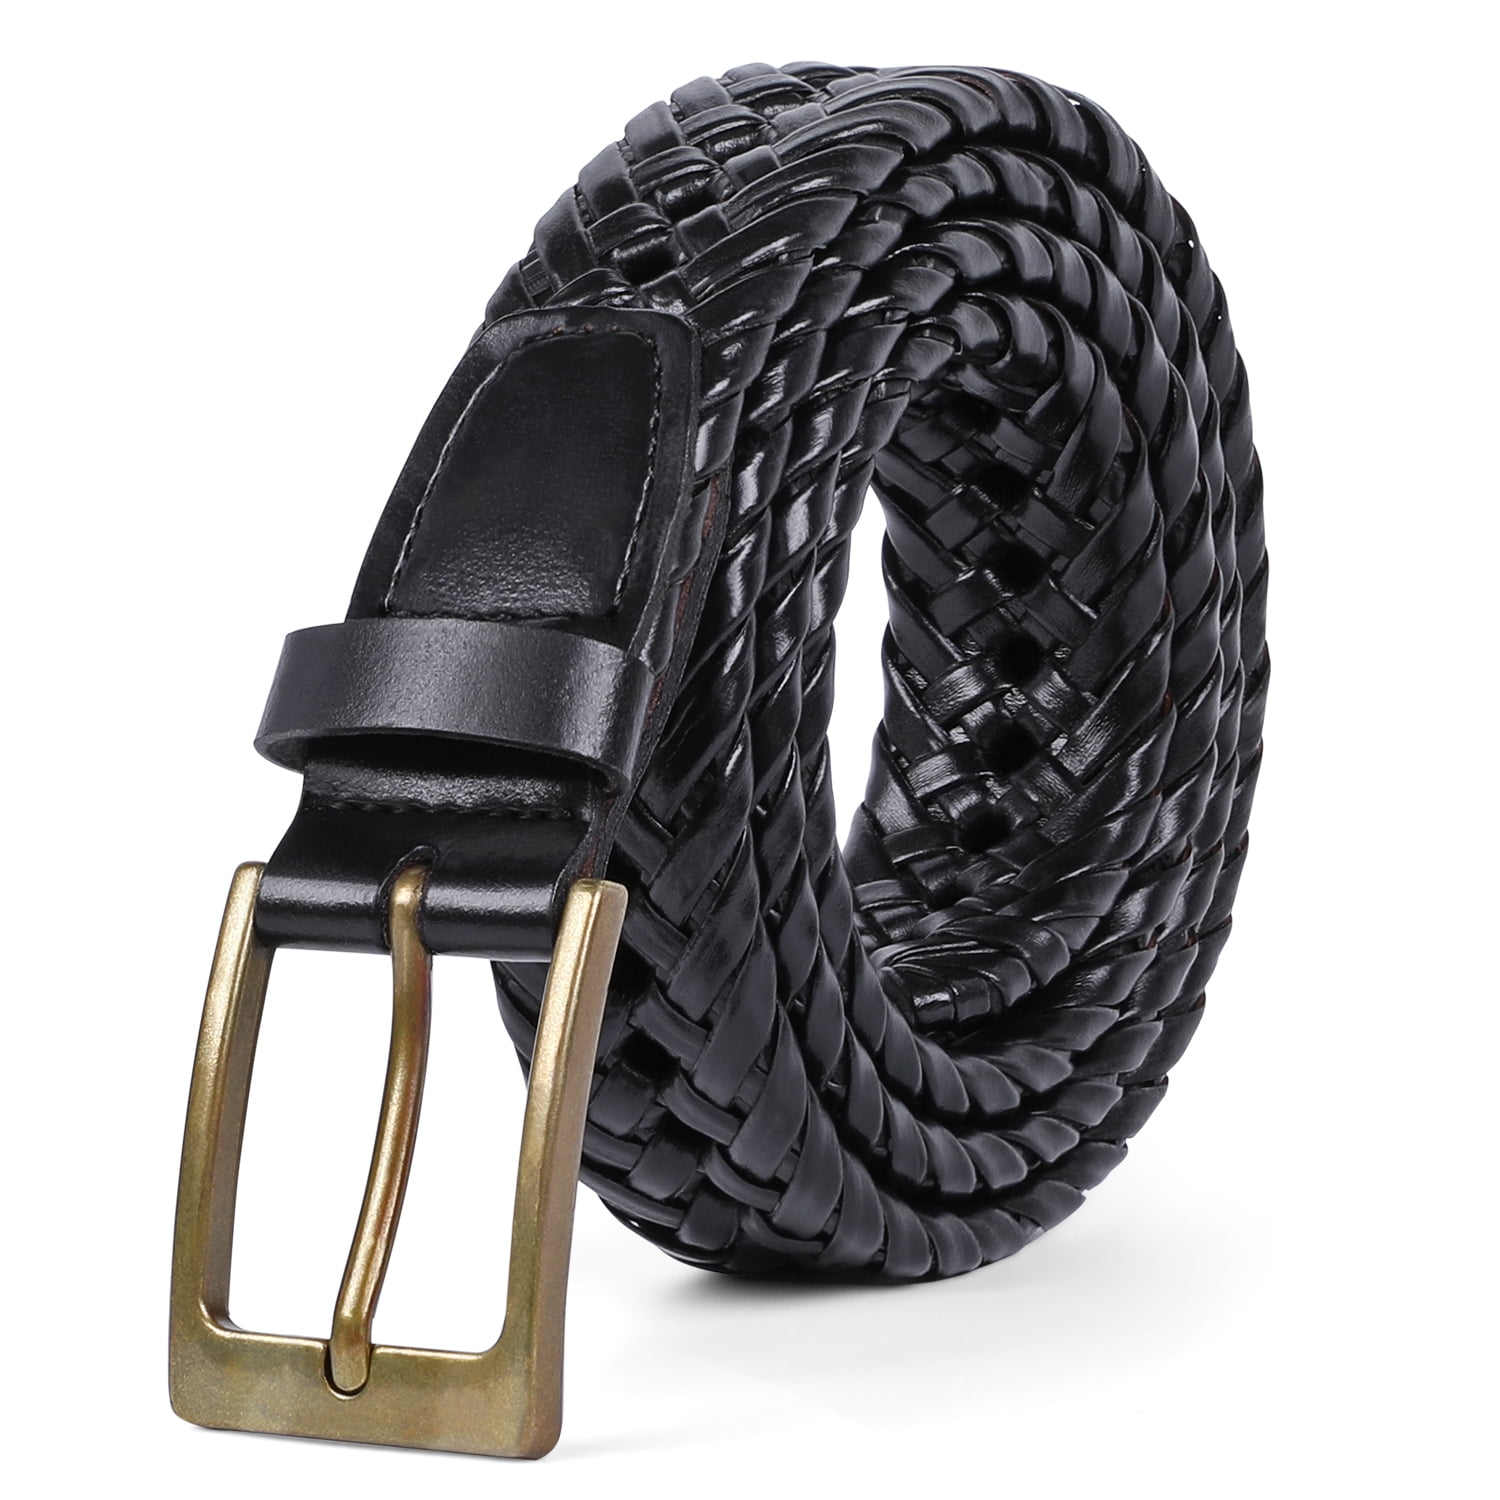 WHIPPY Men's Braided Leather Belt, Woven Casual Belt for Jeans Pants ...